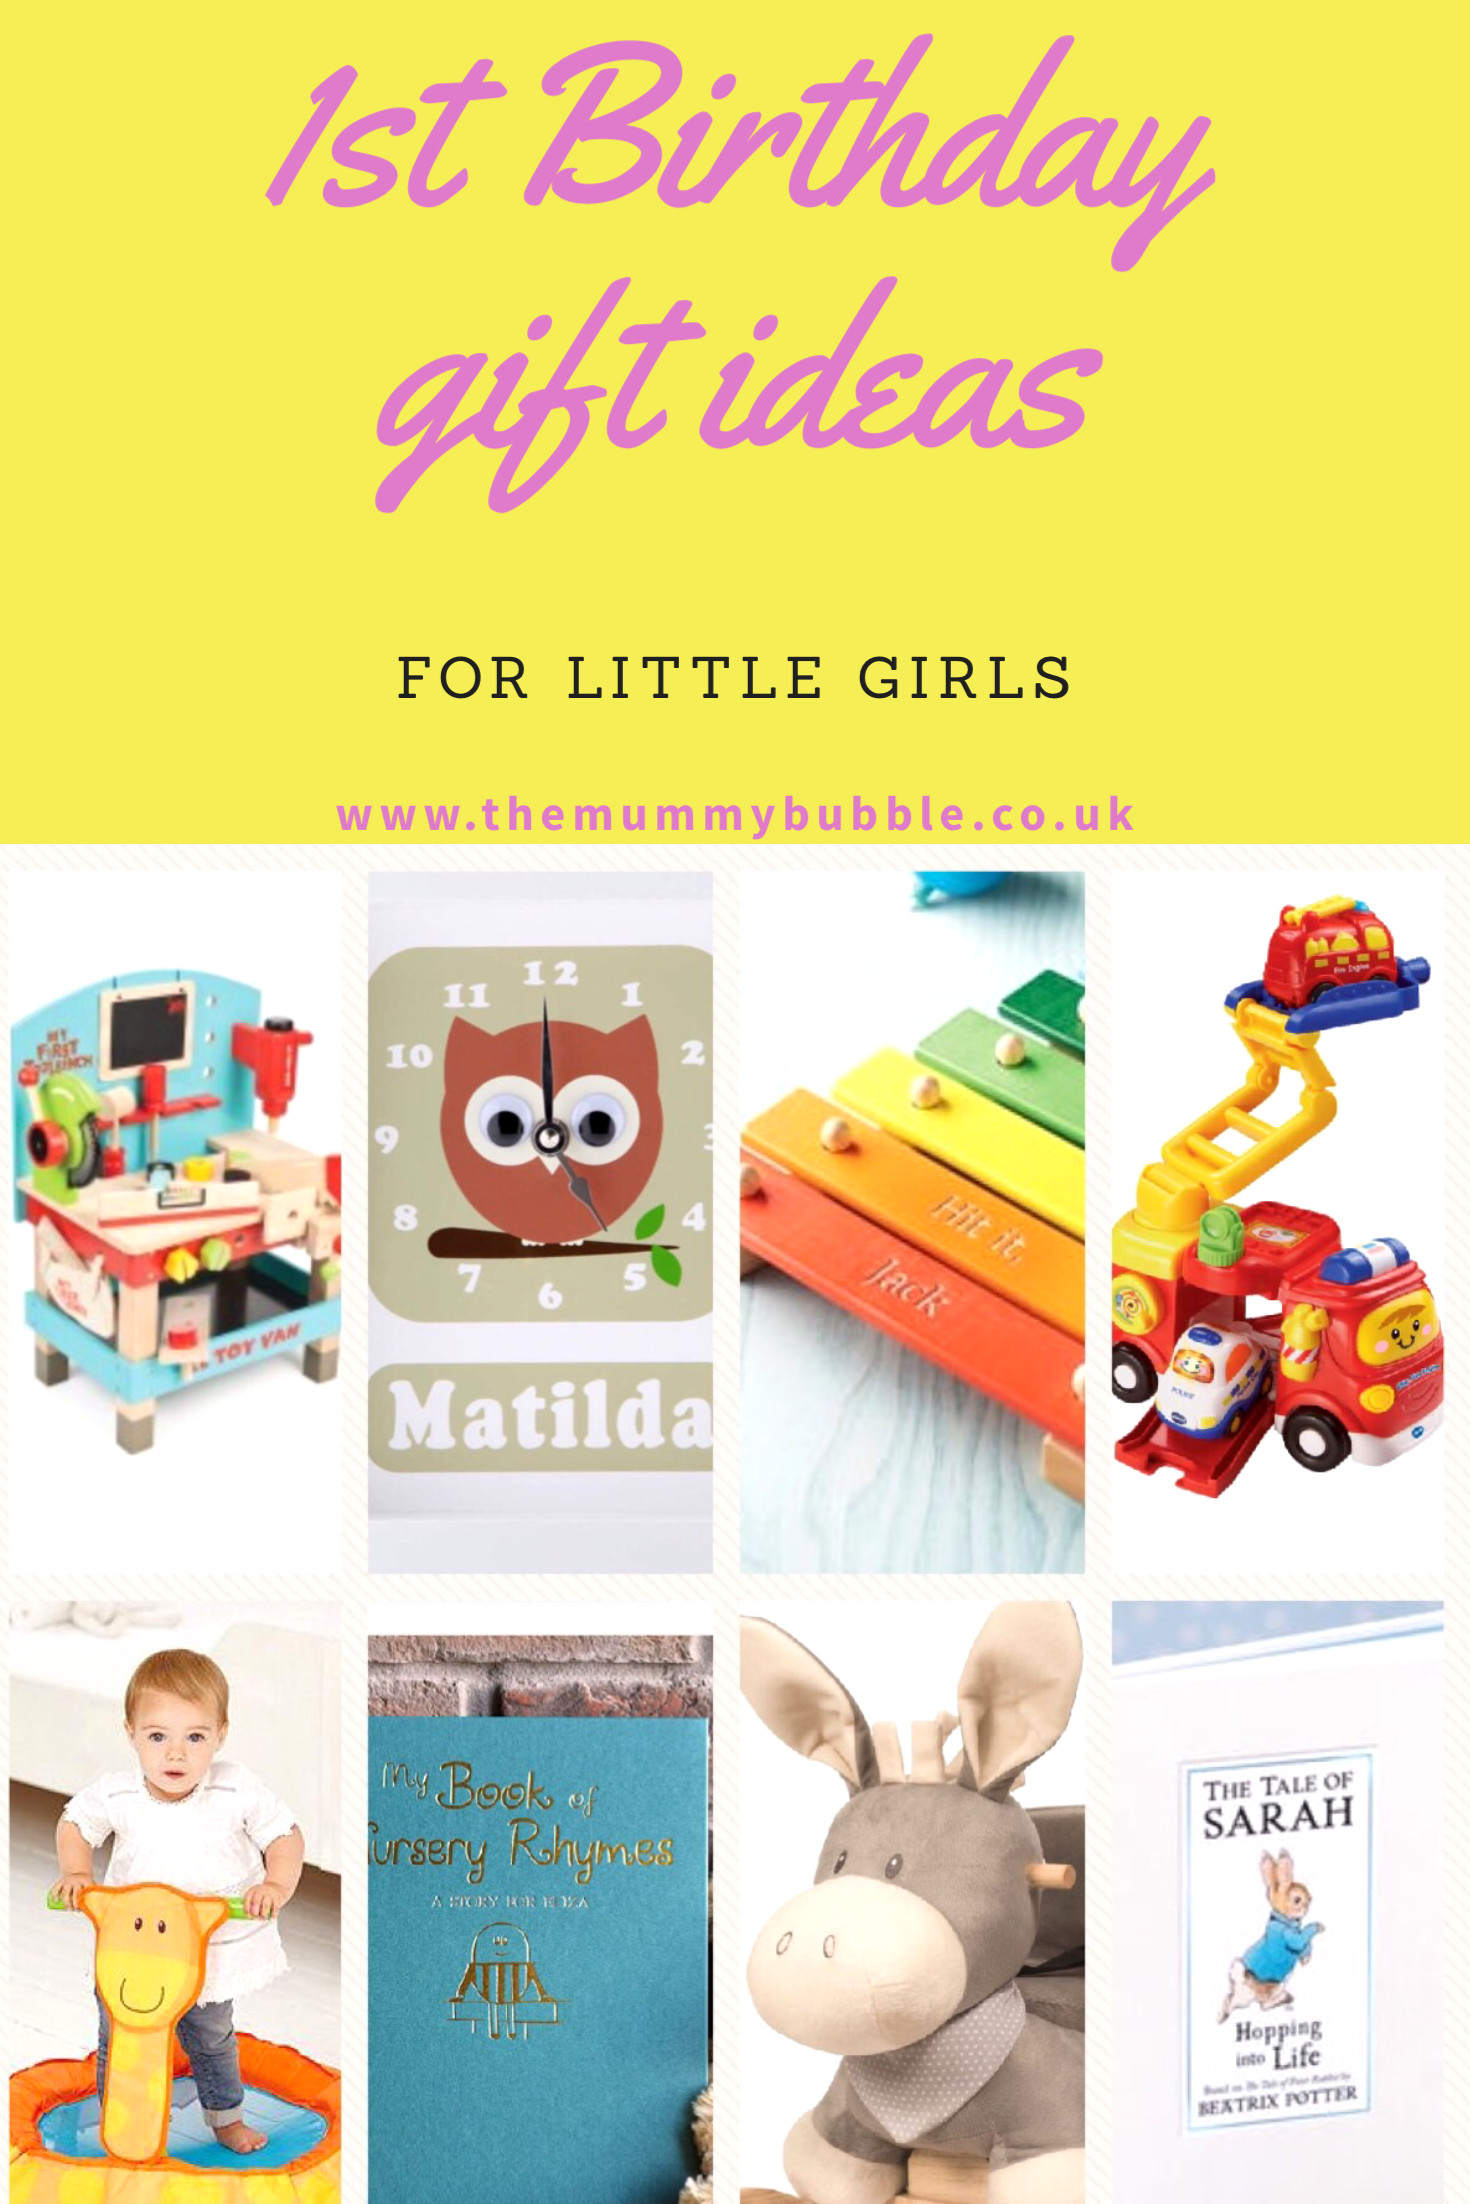 Little Girl Birthday Gift Ideas
 First birthday t ideas for a little girl The Mummy Bubble